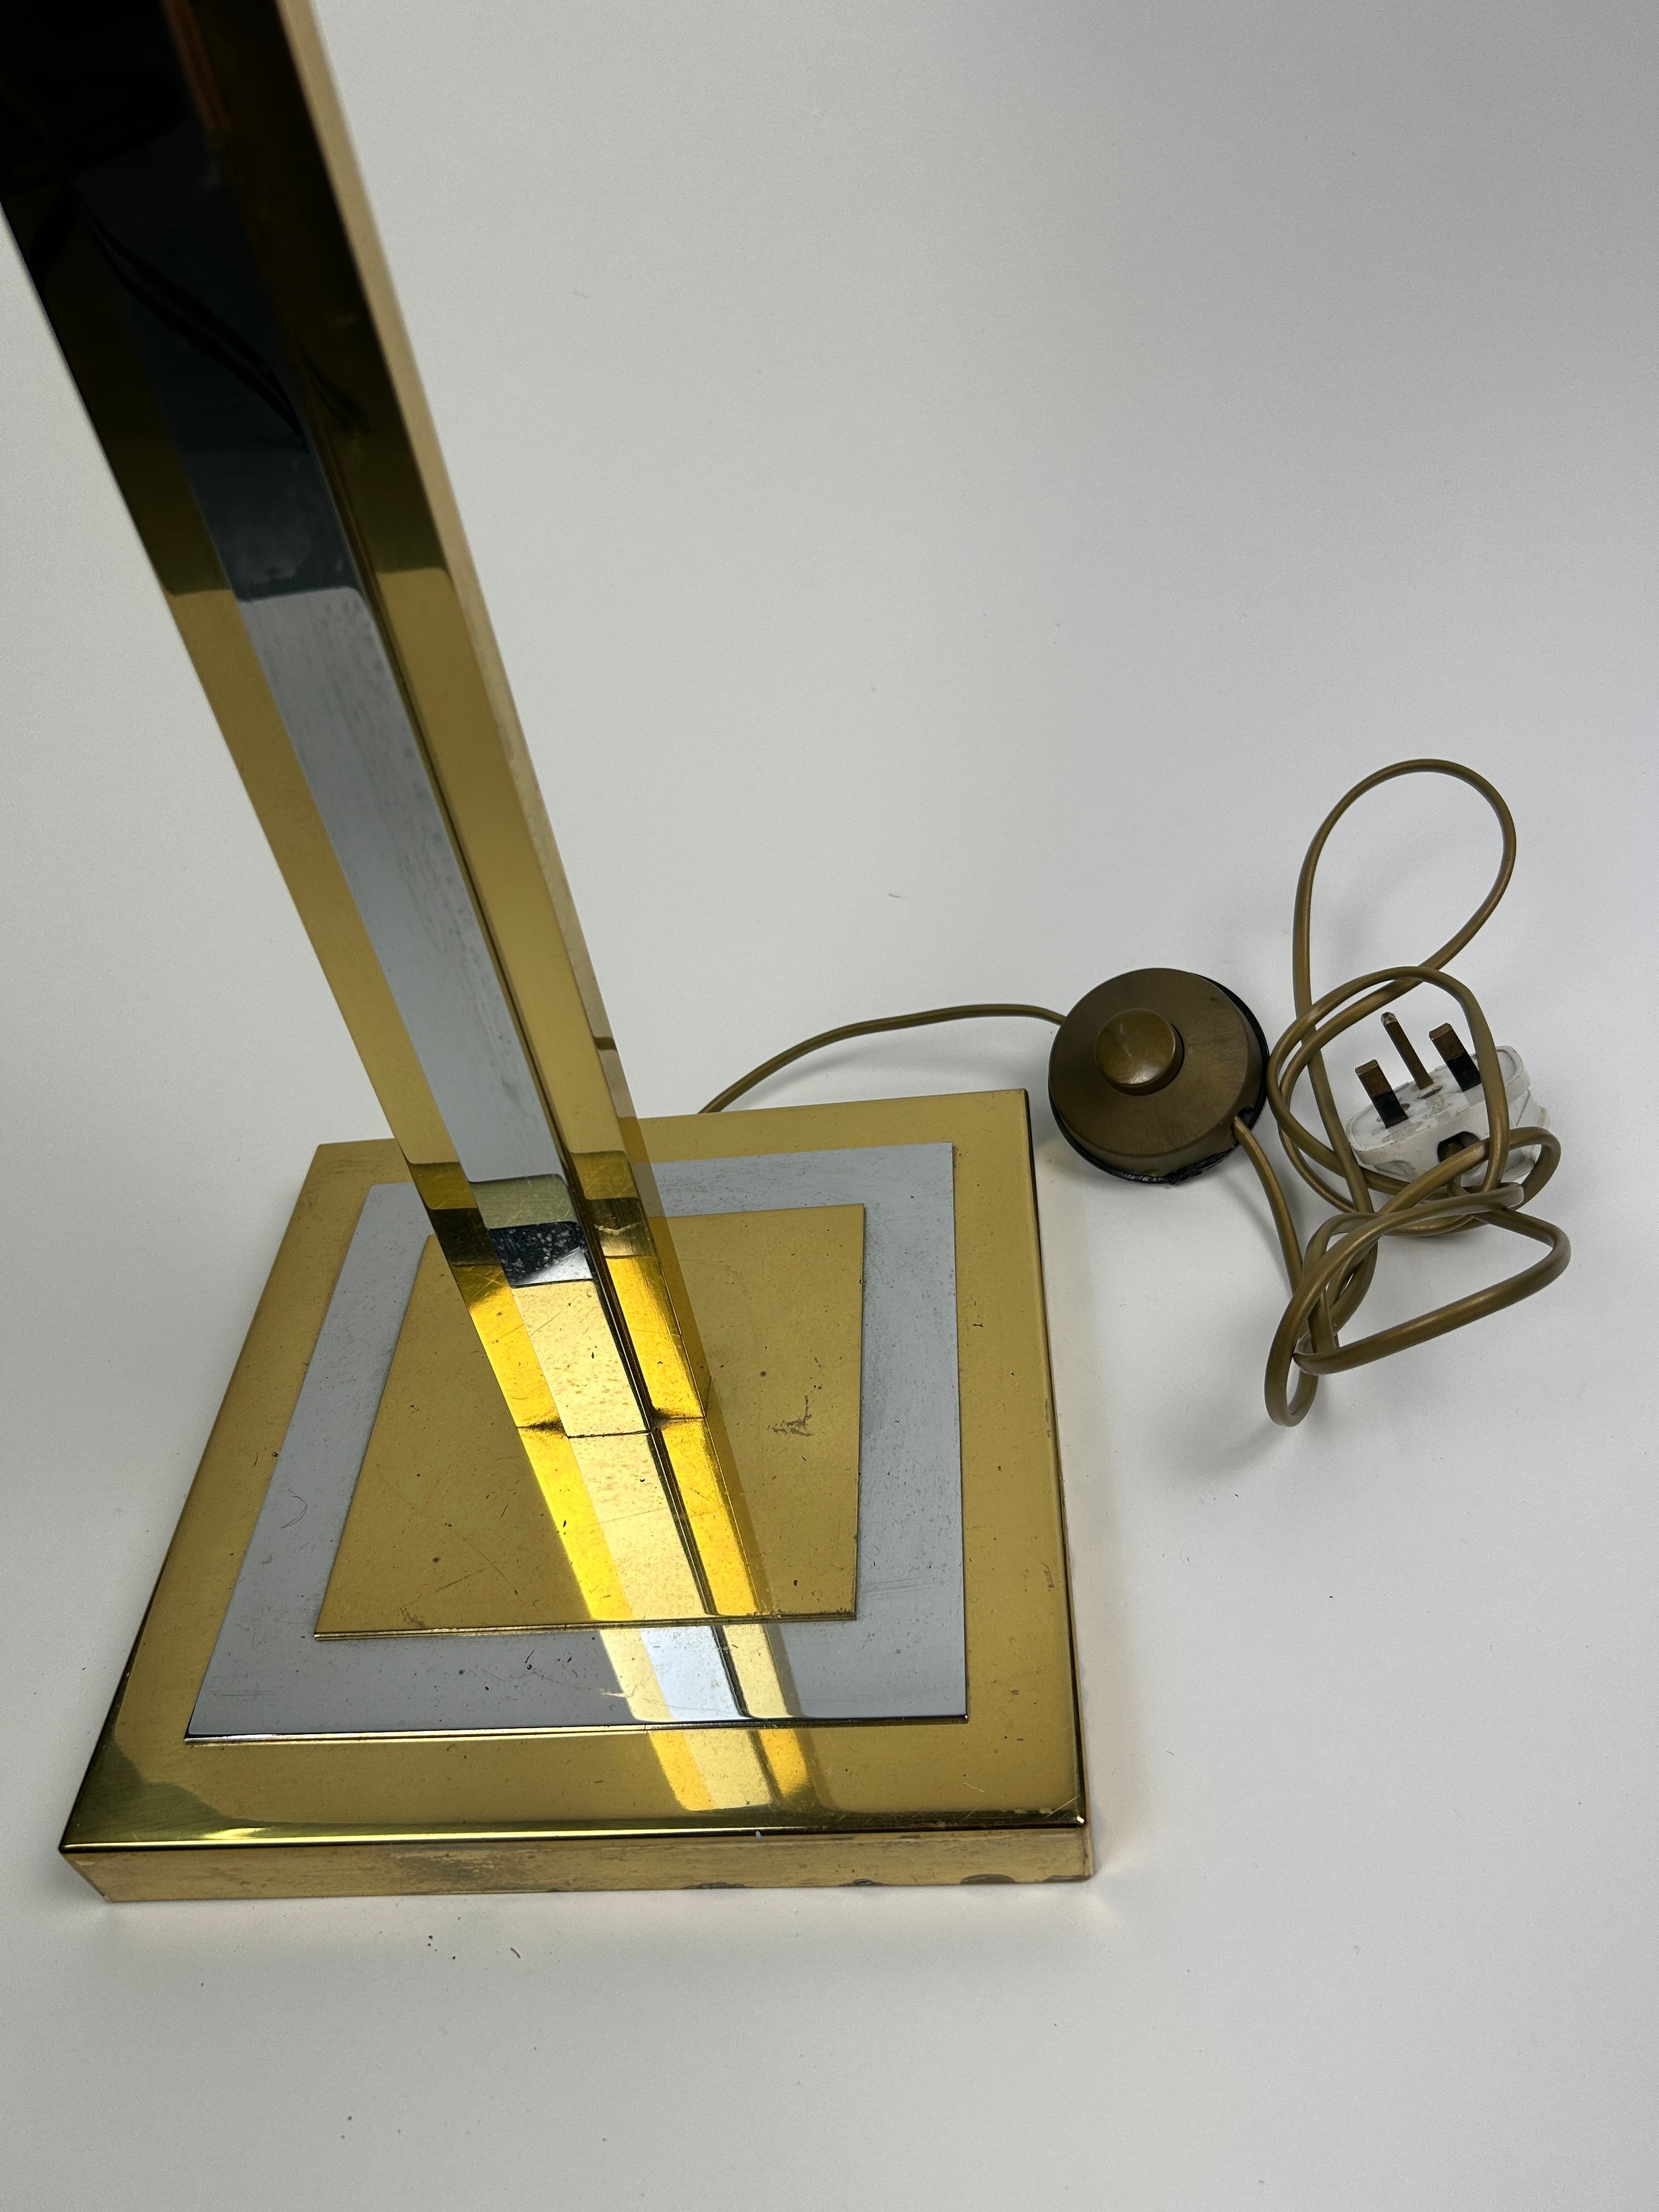 AN ATTRIBUTED TO WILLY RIZZO SKYSCRAPER FLOOR STANDING LAMP - Image 2 of 5